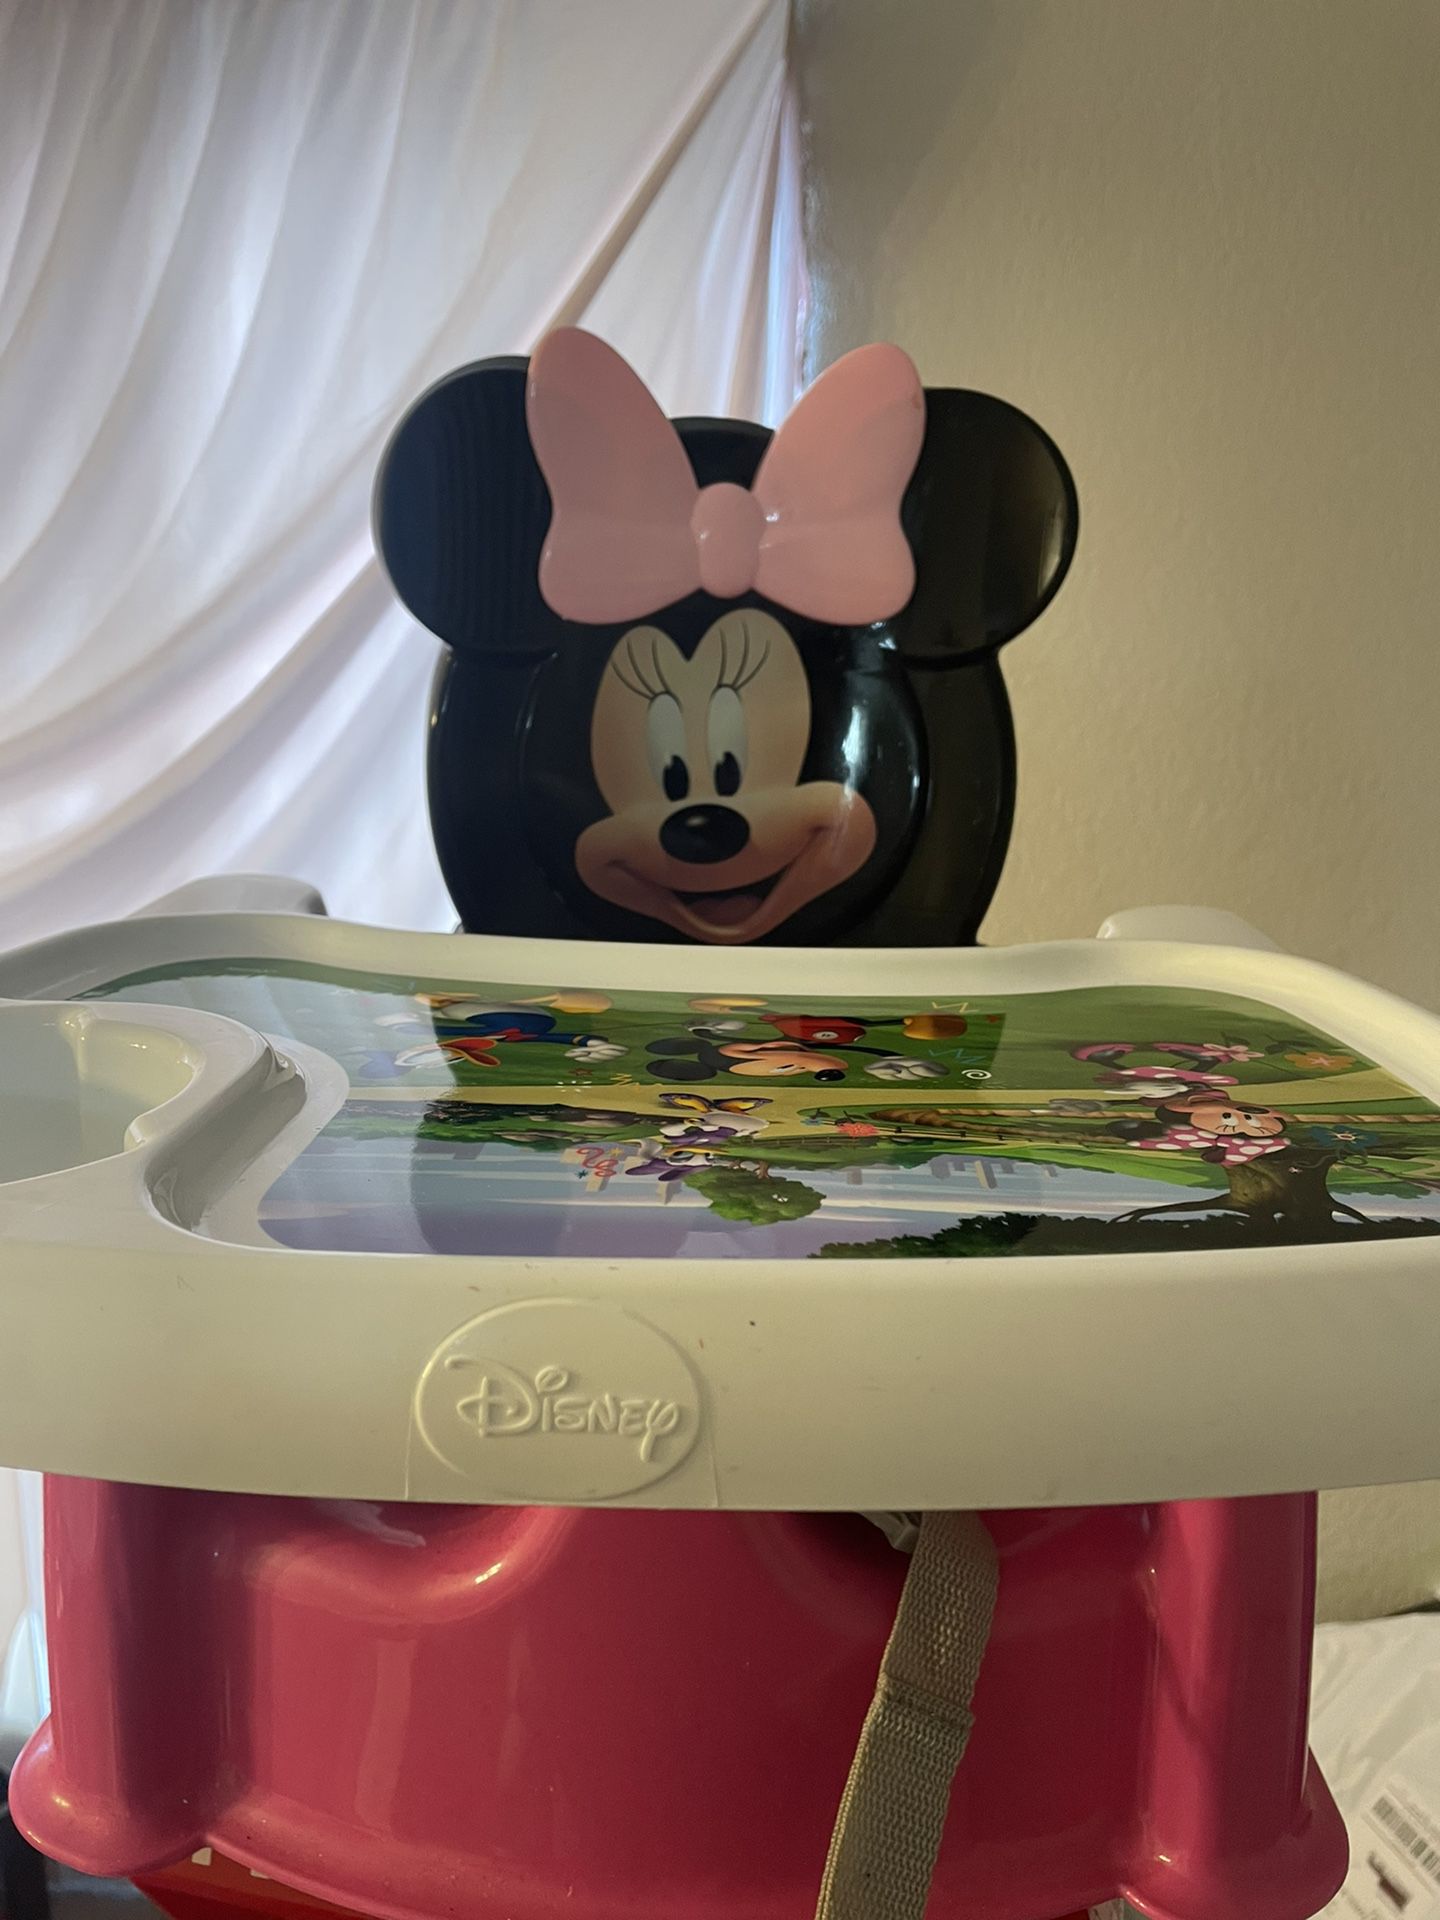 Minnie Mouse Mealtime Booster Seat